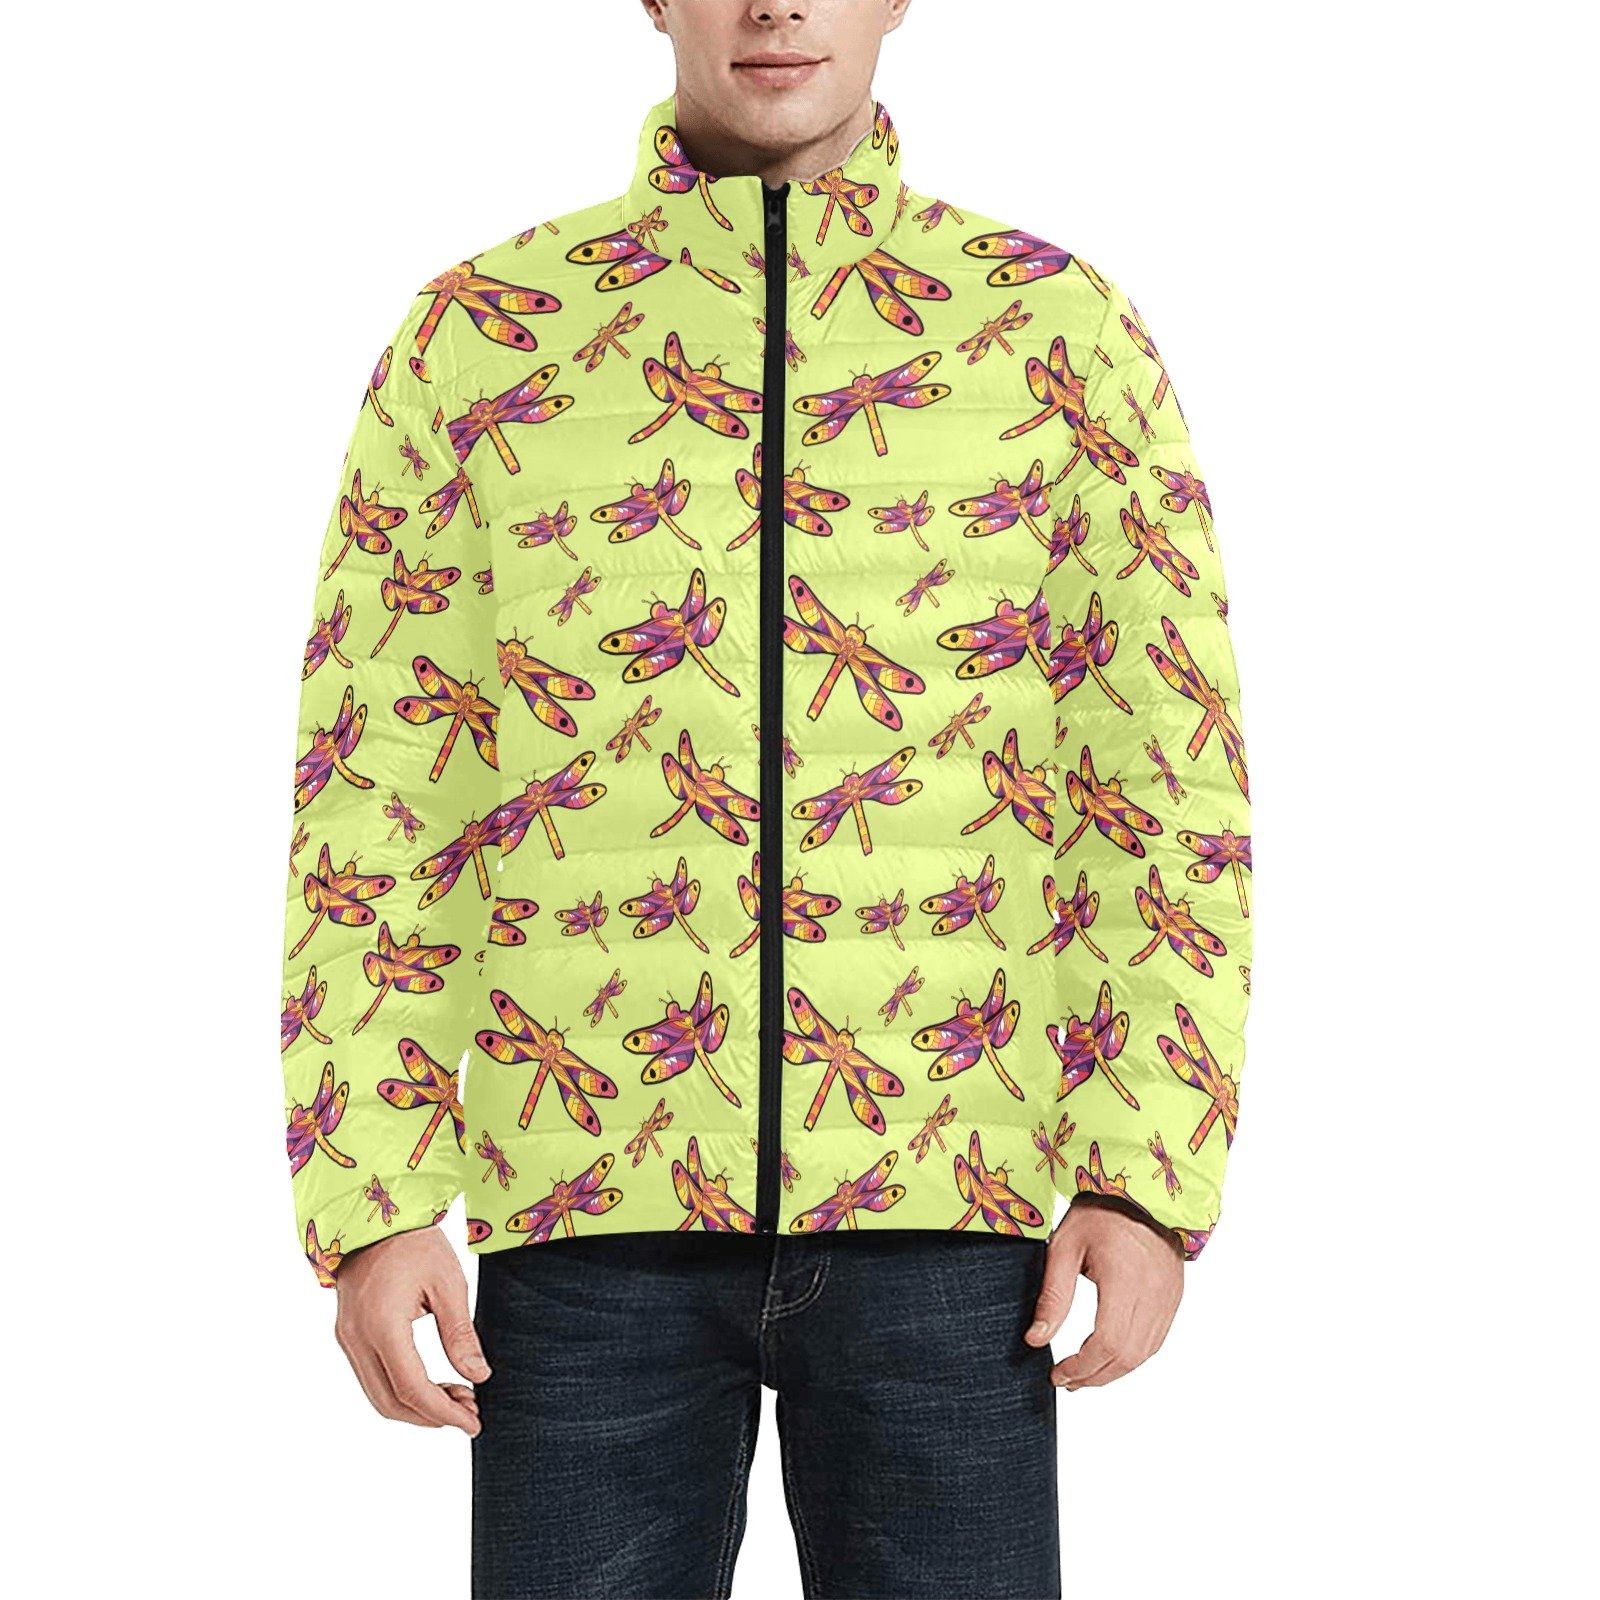 Gathering Lime Men's Stand Collar Padded Jacket (Model H41) Men's Stand Collar Padded Jacket (H41) e-joyer 